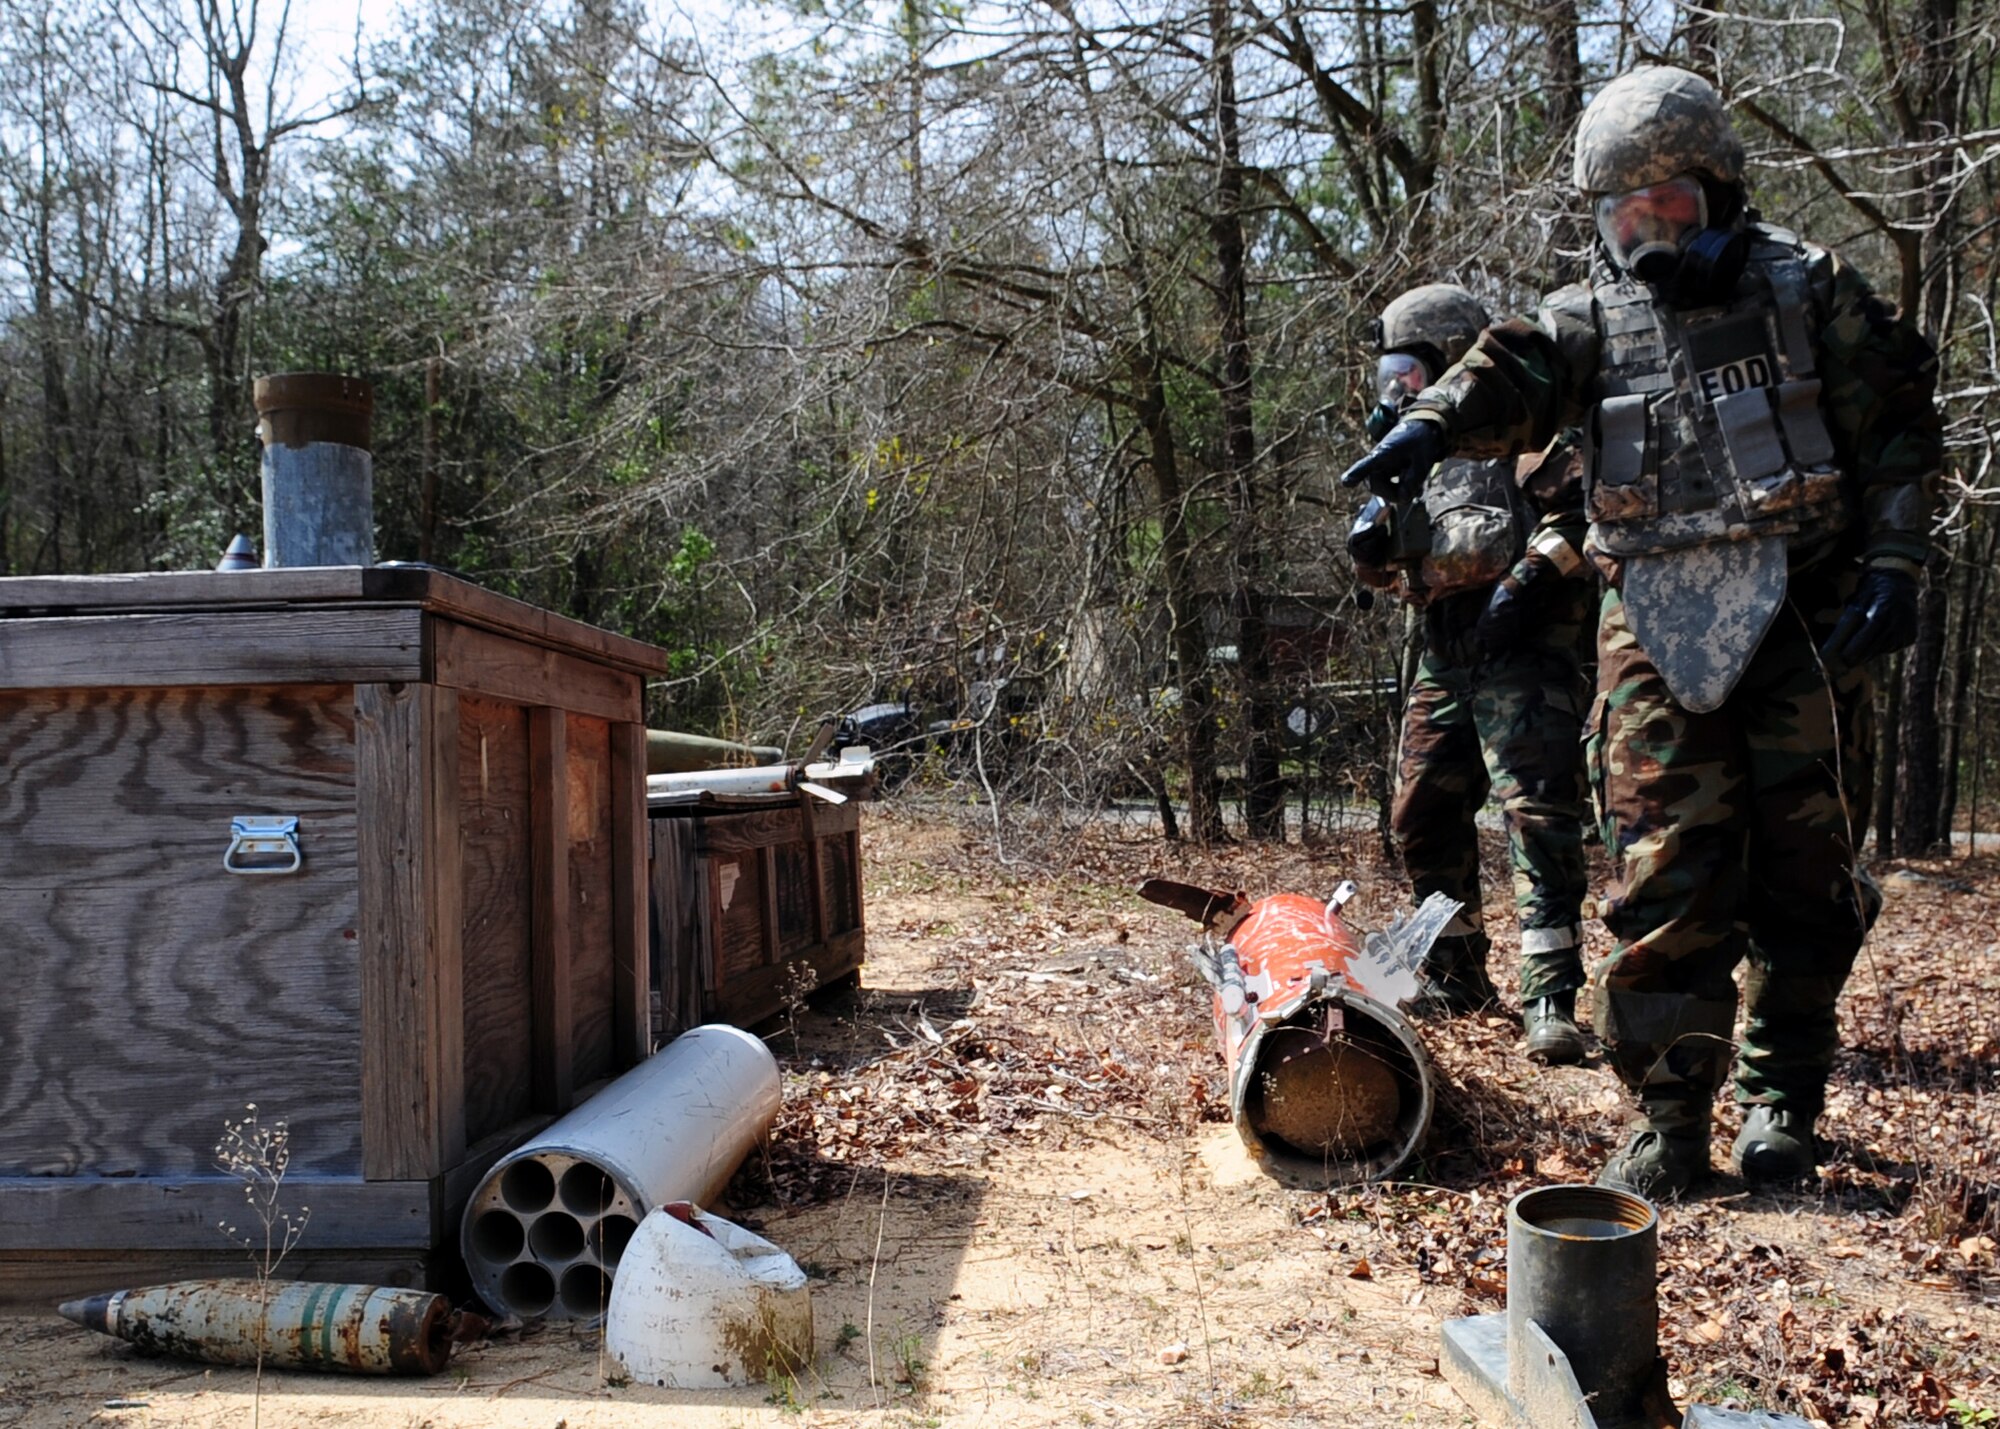 Airman 1st Class Brandon Martin (foreground) points out a simulated leaking chemical explosive to Senior Airman Cooper Gibson, both are explosive ordinance disposal specialists with the 4th Civil Engineer Squadron, during a training exercise on Seymour Johnson Air Force Base, N.C., March 19, 2009. Airmen Martin and Gibson have identified and disposed of the explosive in a timely and safe manner. (U.S. Air Force Photo by Airman 1st Class Rae Perry)